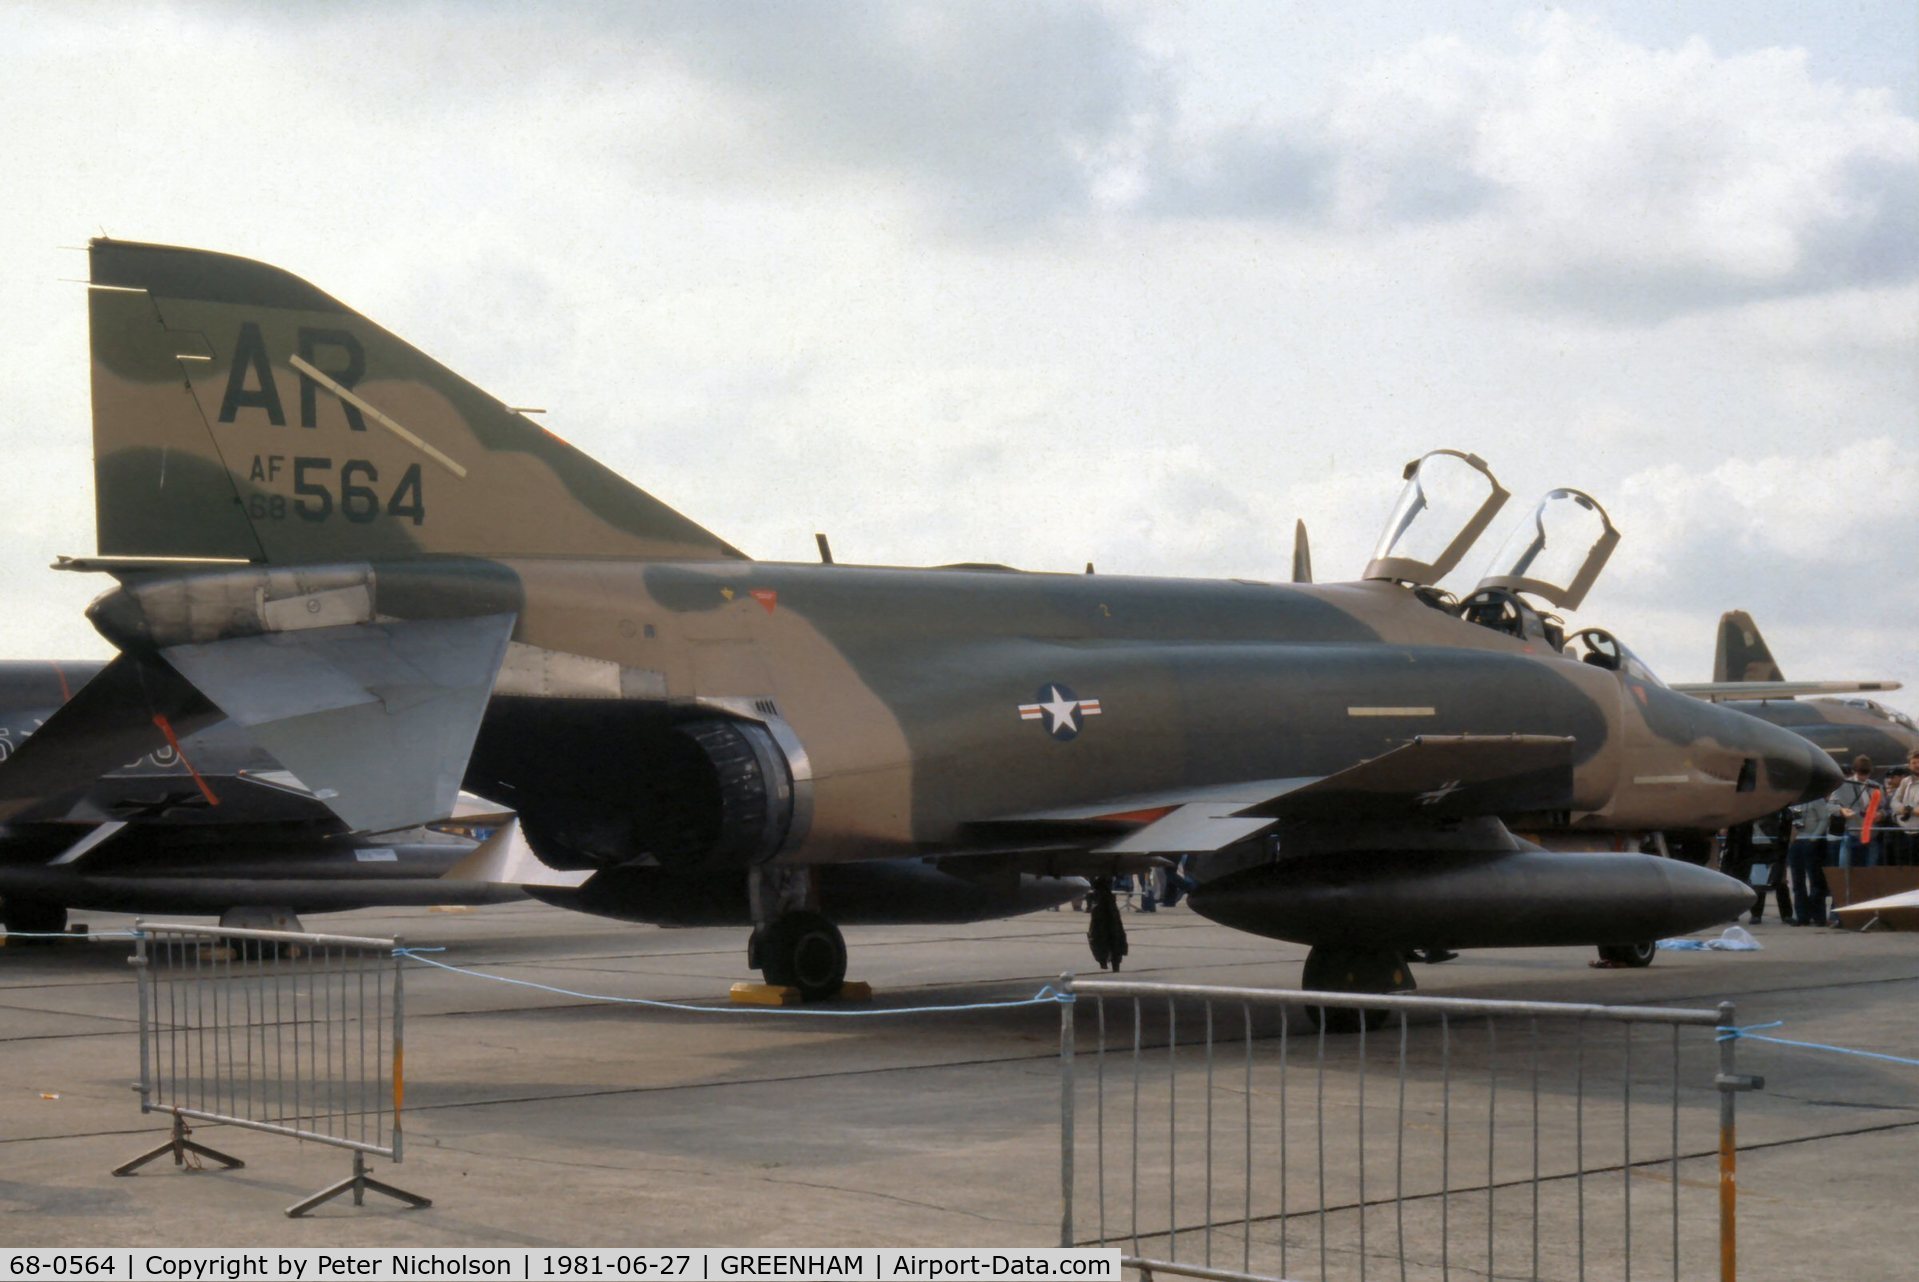 68-0564, 1968 McDonnell Douglas RF-4C Phantom II C/N 3451, RF-4C of 1 Tactical Reconnaissance Squadron/10 Tactical Reconnaissance Wing at the 1981 Intnl Air Tattoo at RAF Greenham Common.